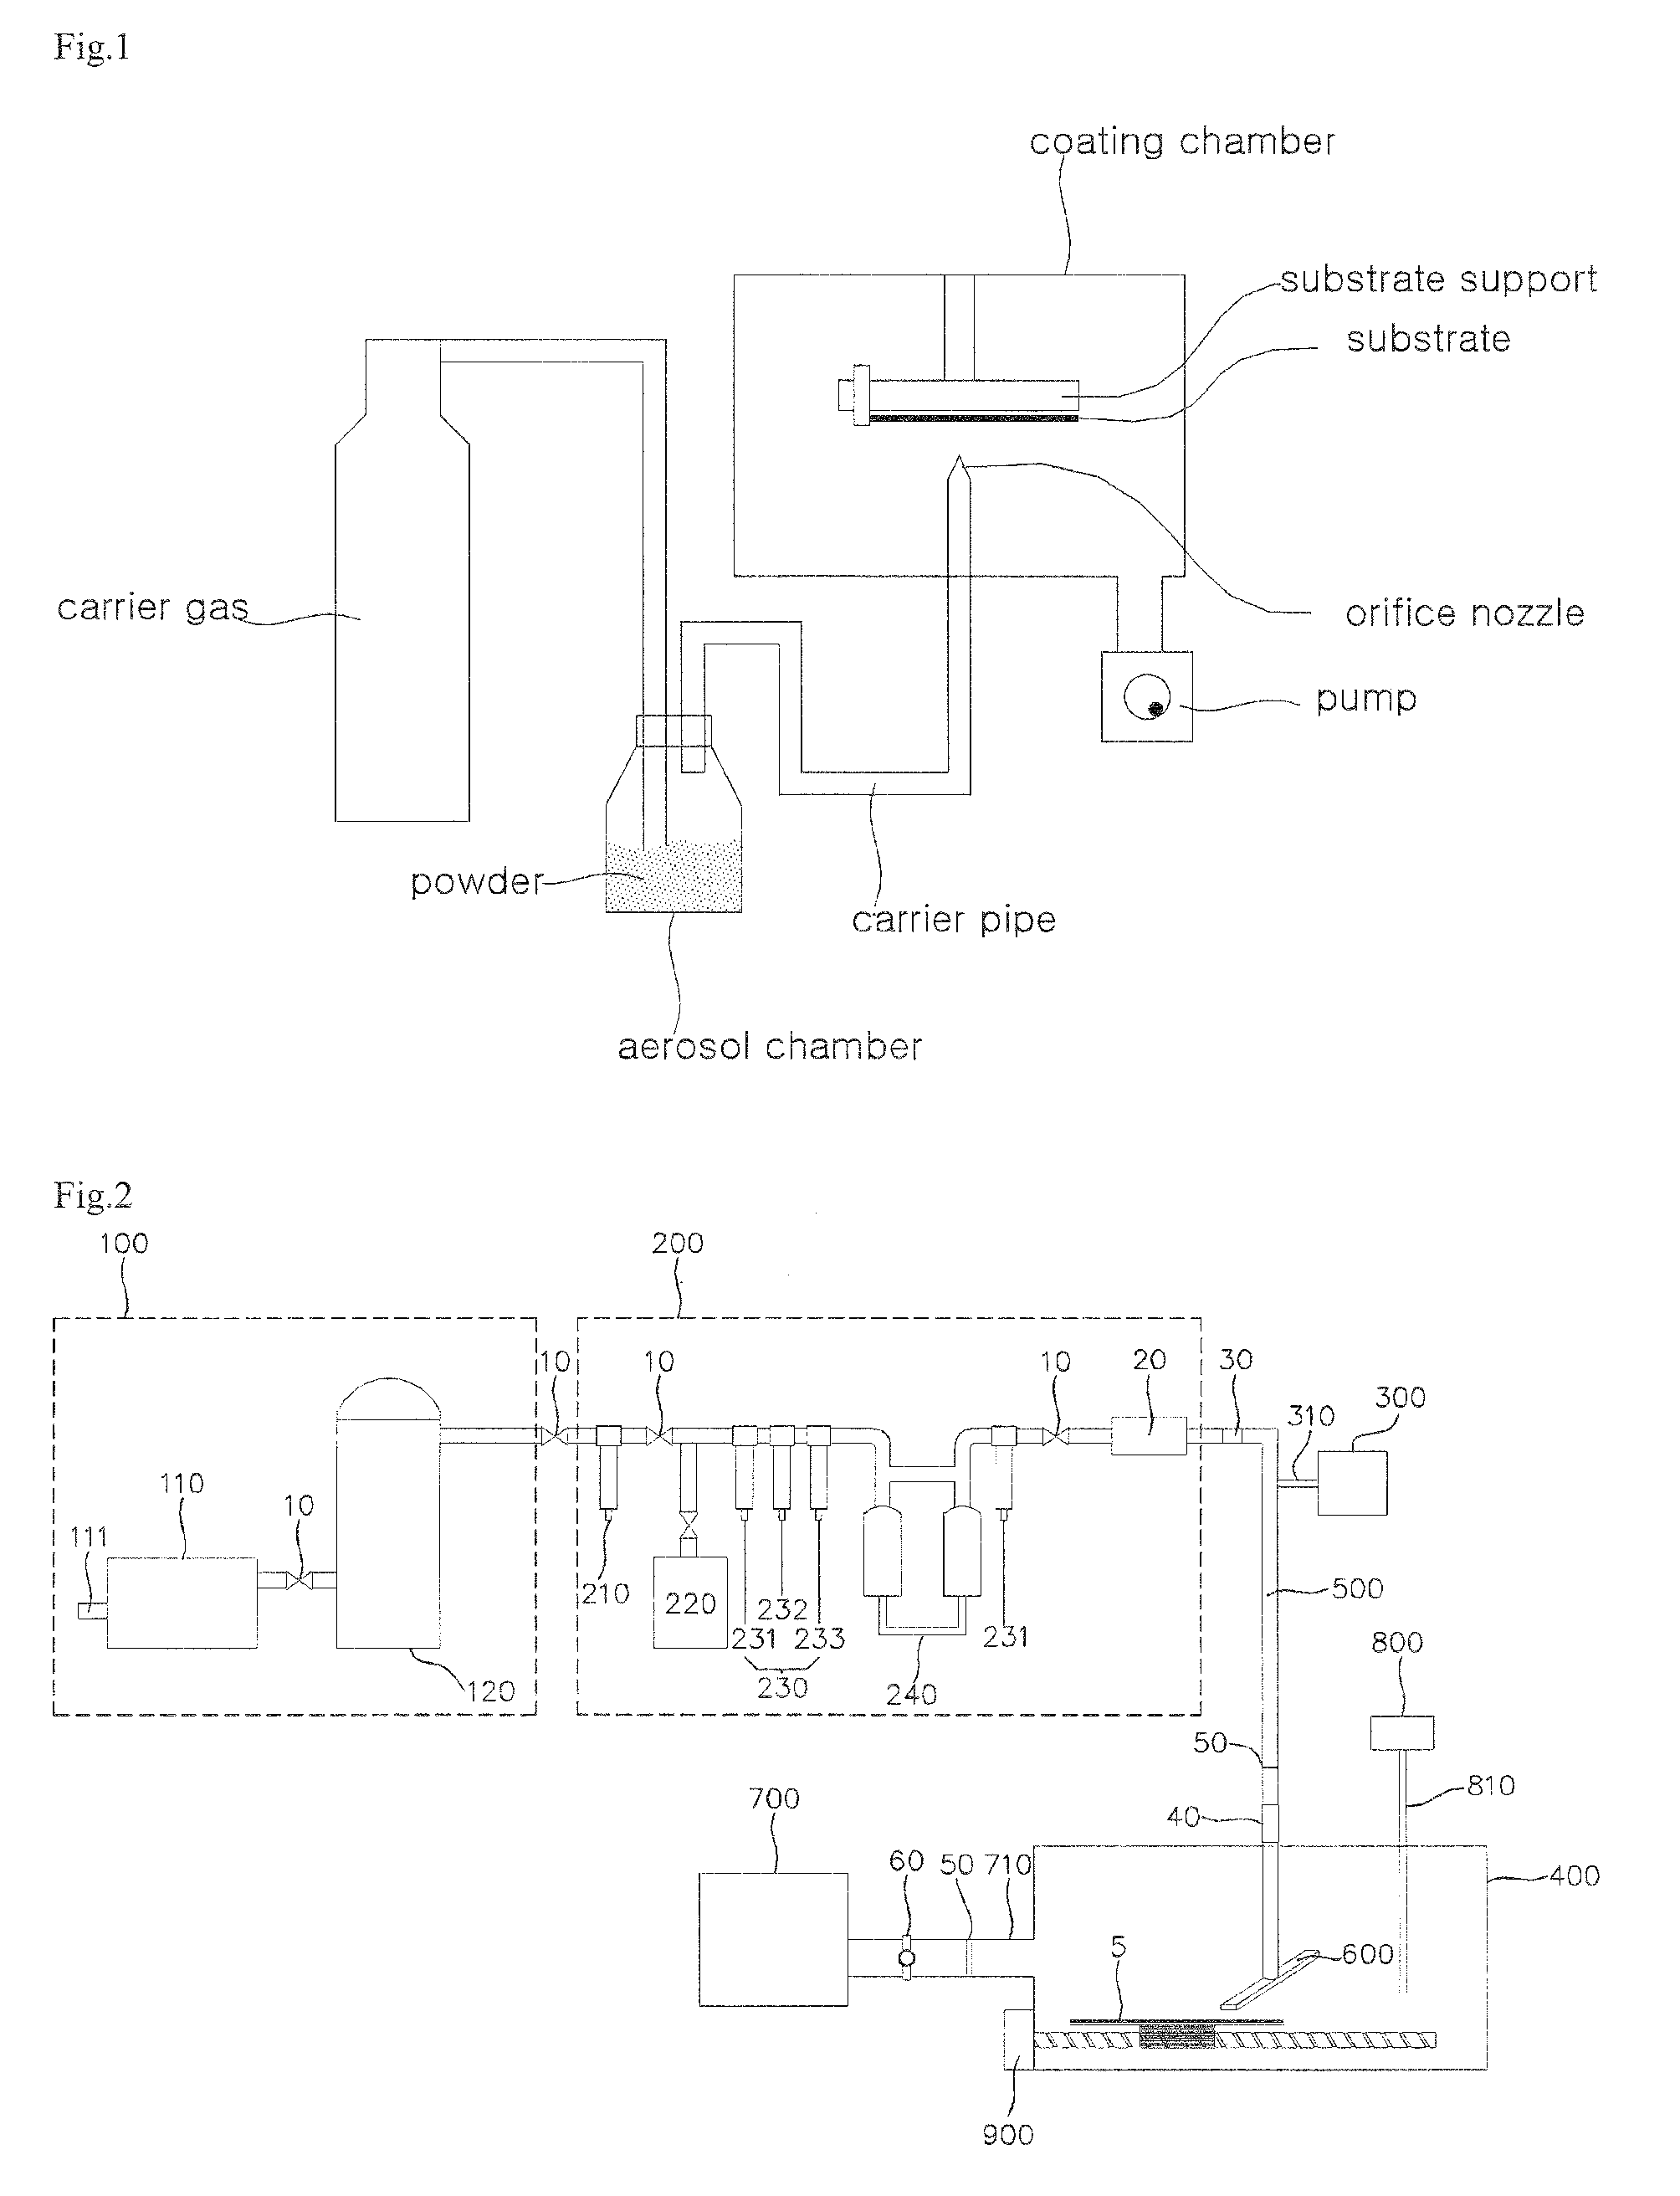 Apparatus and method for continuous powder coating